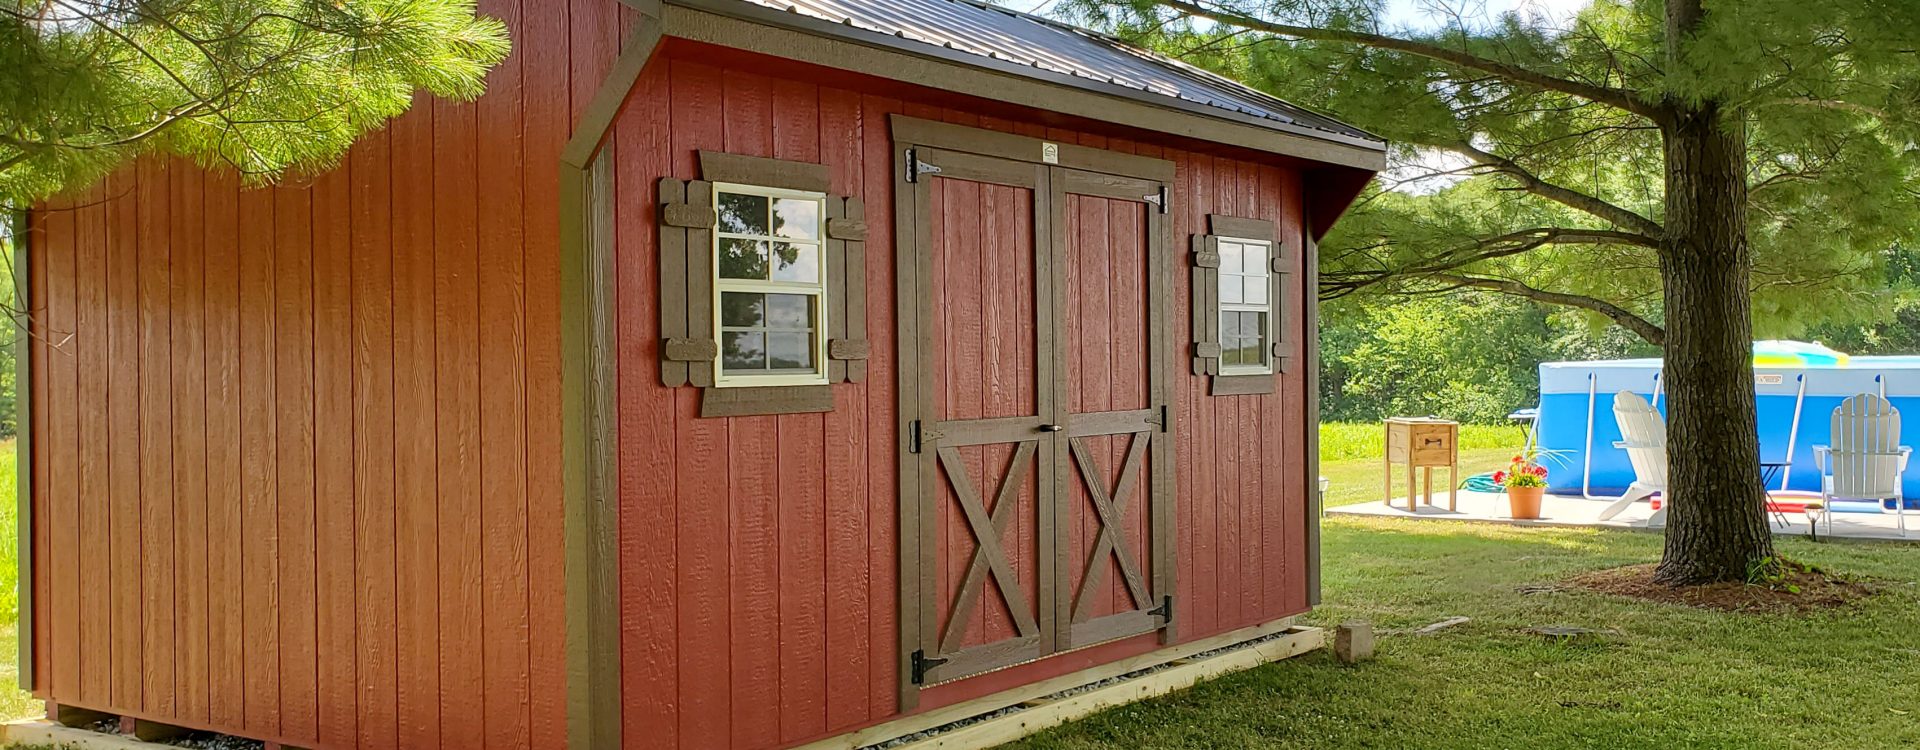 shed with overhang for backyard storage